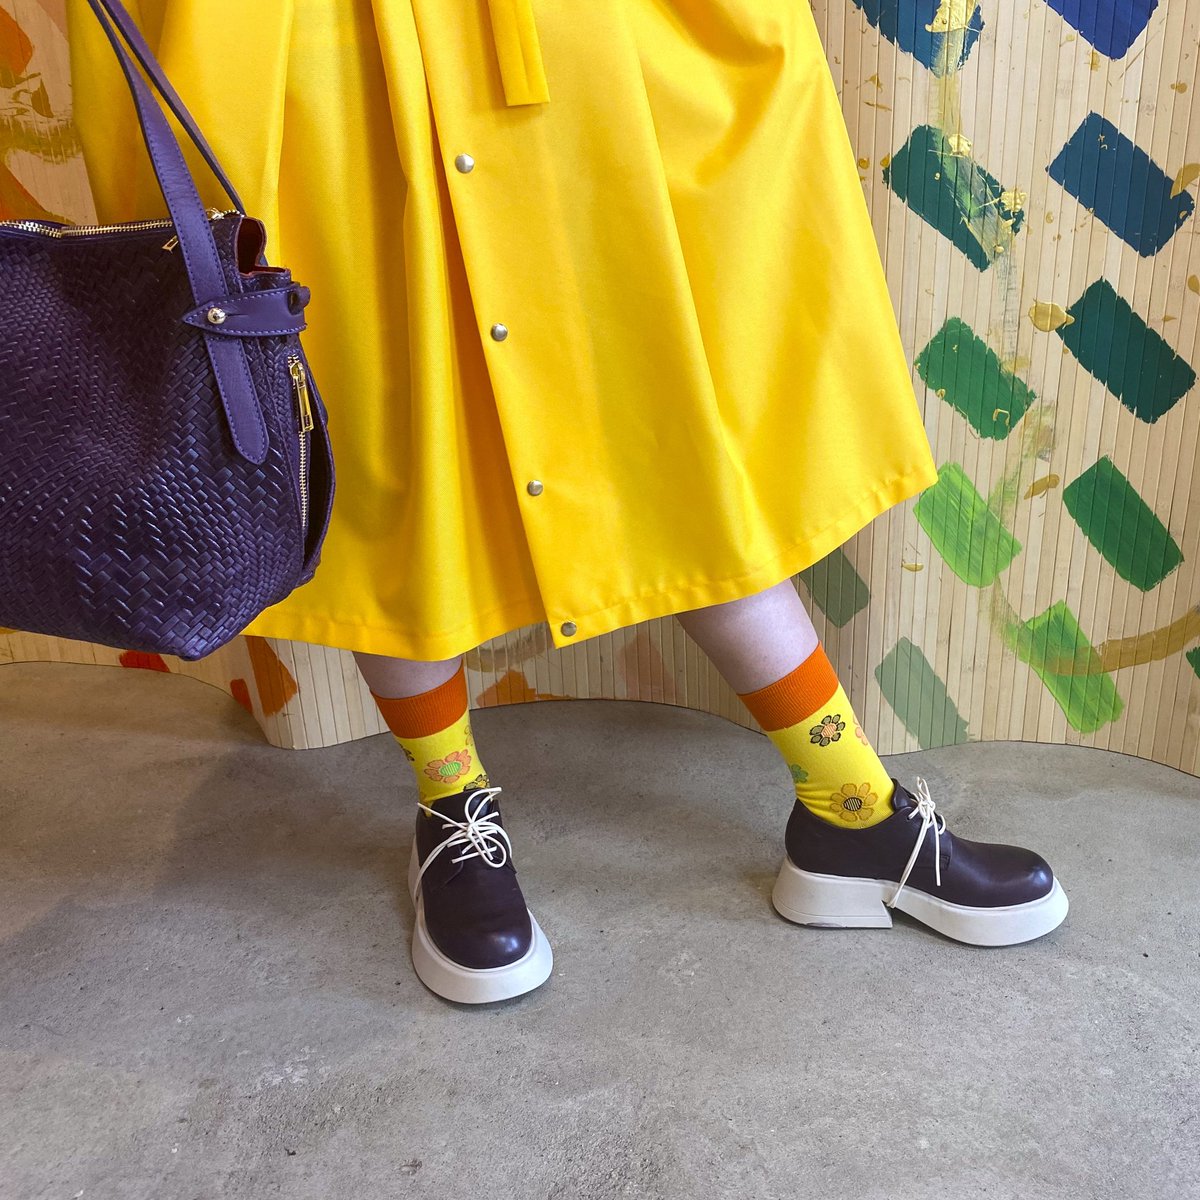 violet and yellow
💜💛💜💛
.
#colorcontrast
.
#handmadeinitaly #laceuploafers #lowshoes #chunkysole #tabio #madeinjapan #socksoftheday #socksandshoes #bagsandshoes #shoestagram #summercollection
.
#schuhbarberlin #bötzowkiez #prenzlauerberg #berlin